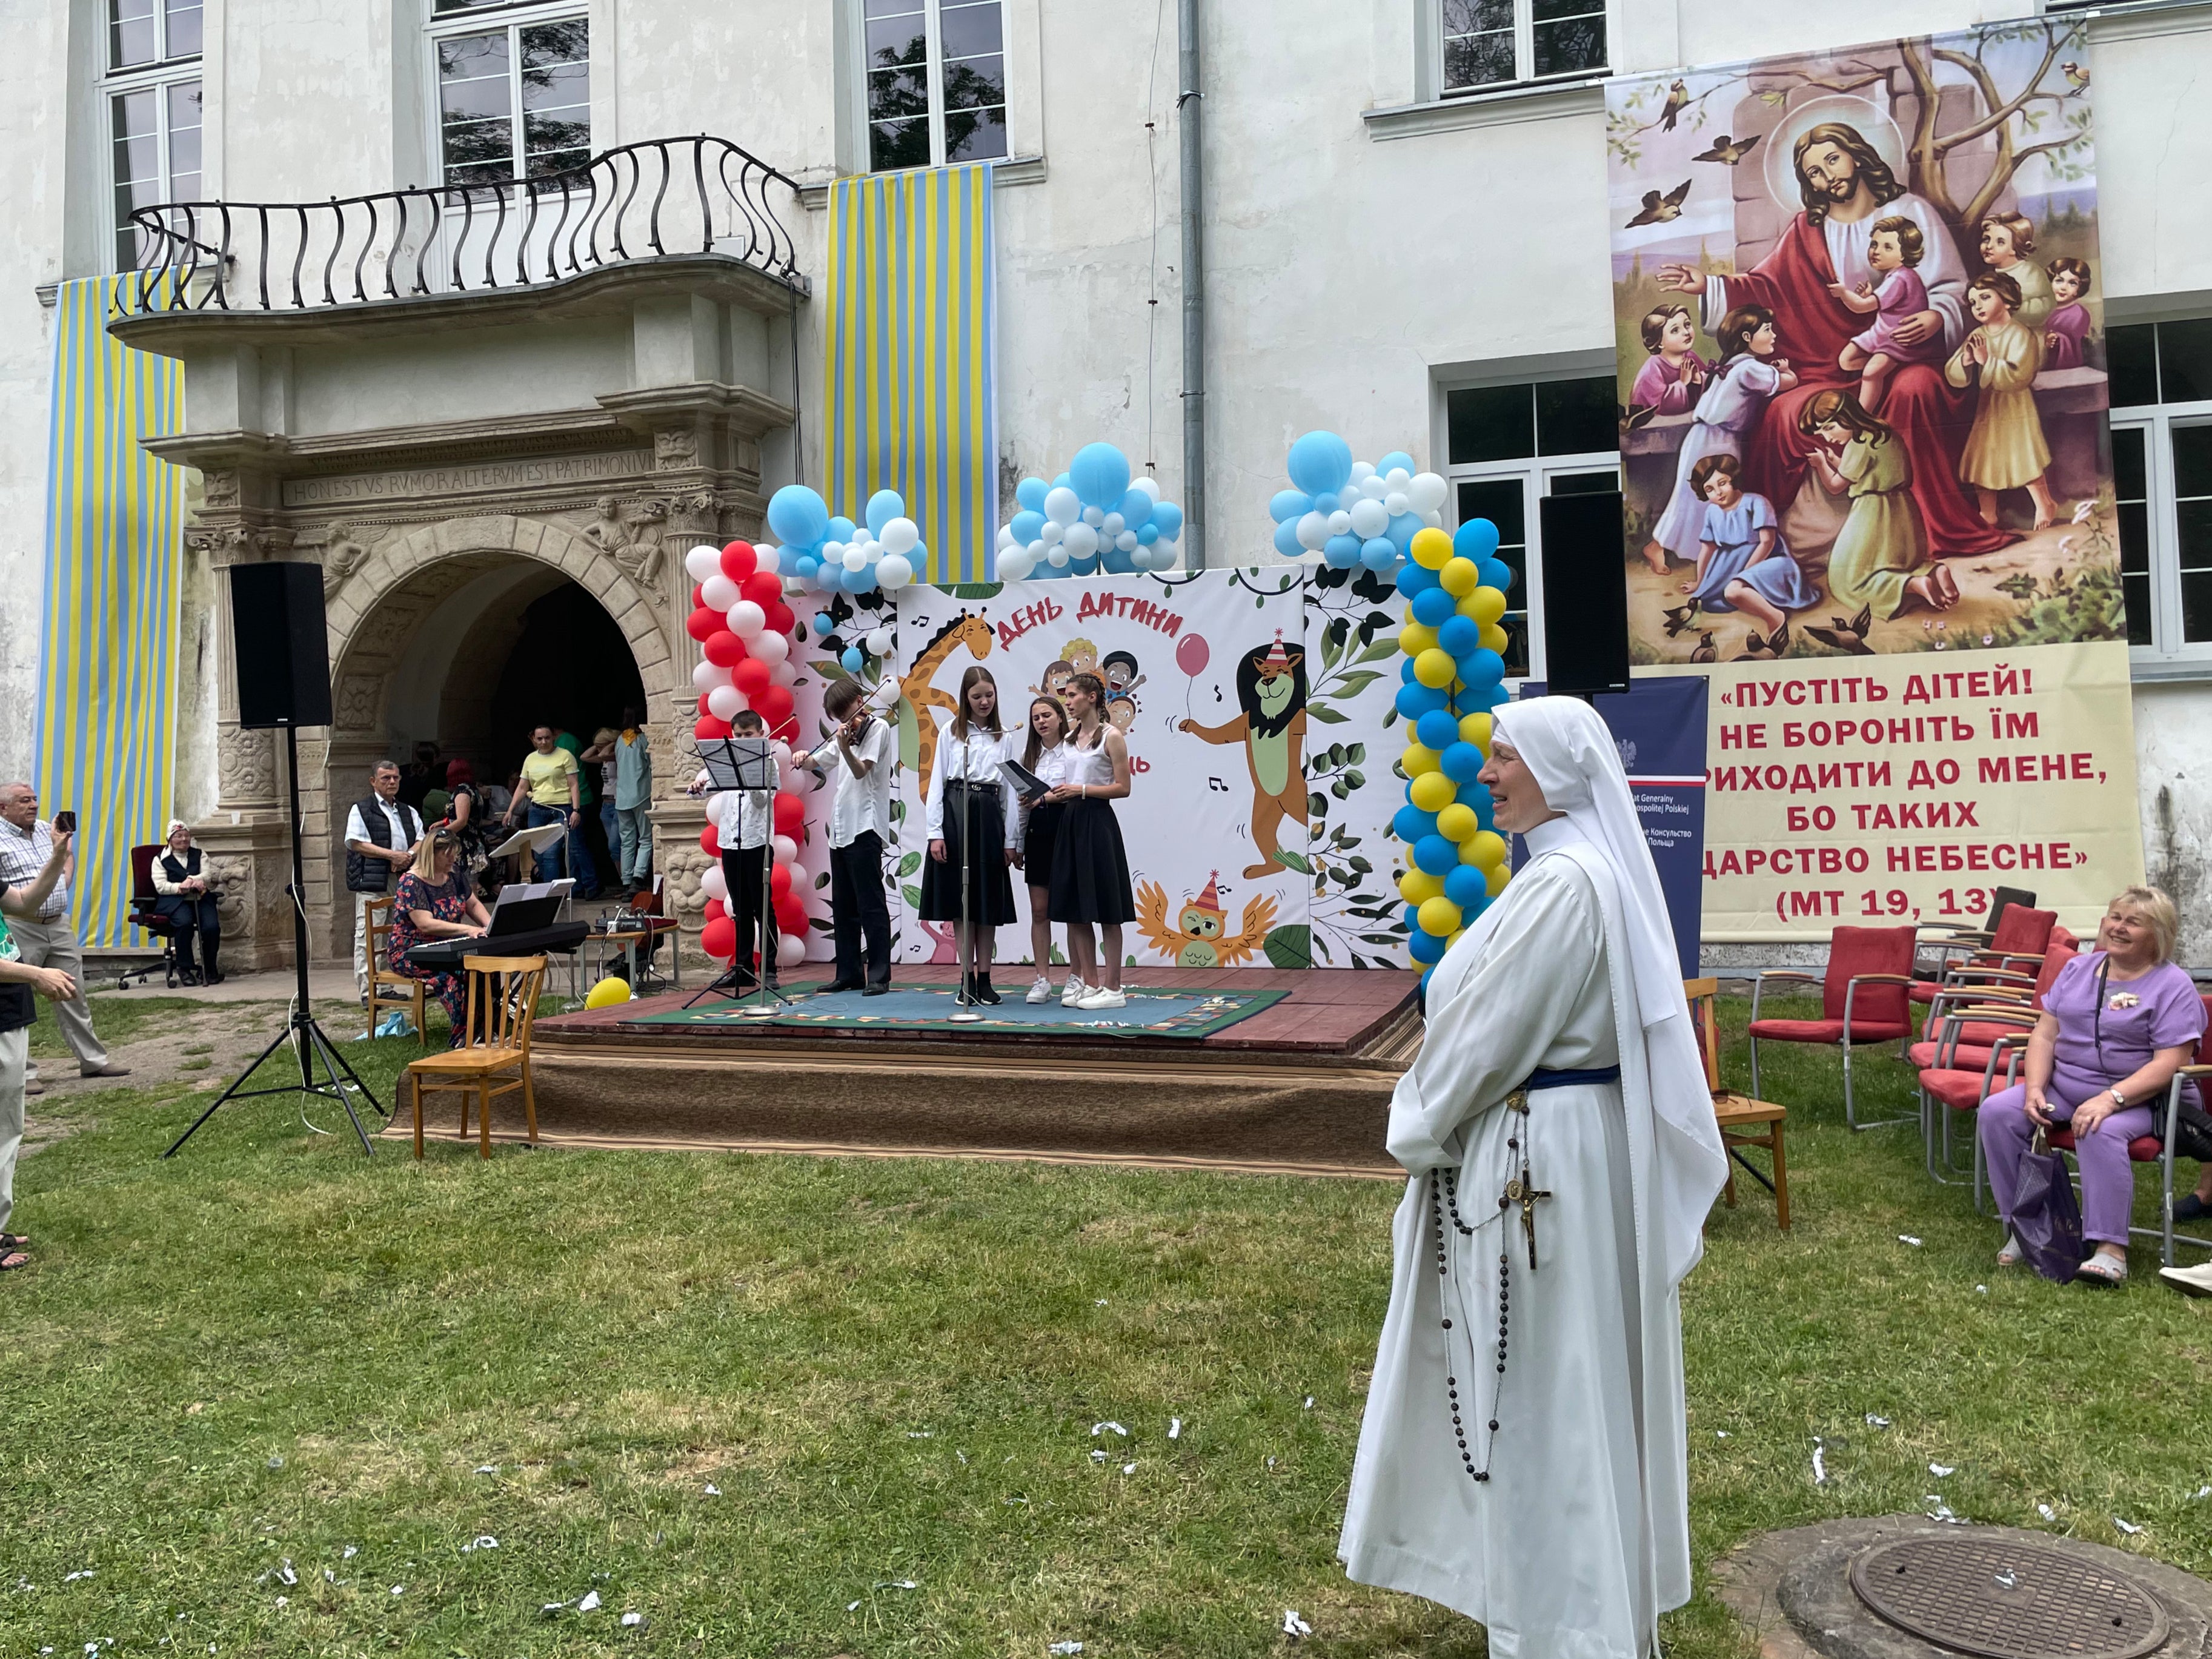 Sister Julia at a festival at Yazlovets convent in summer 2023